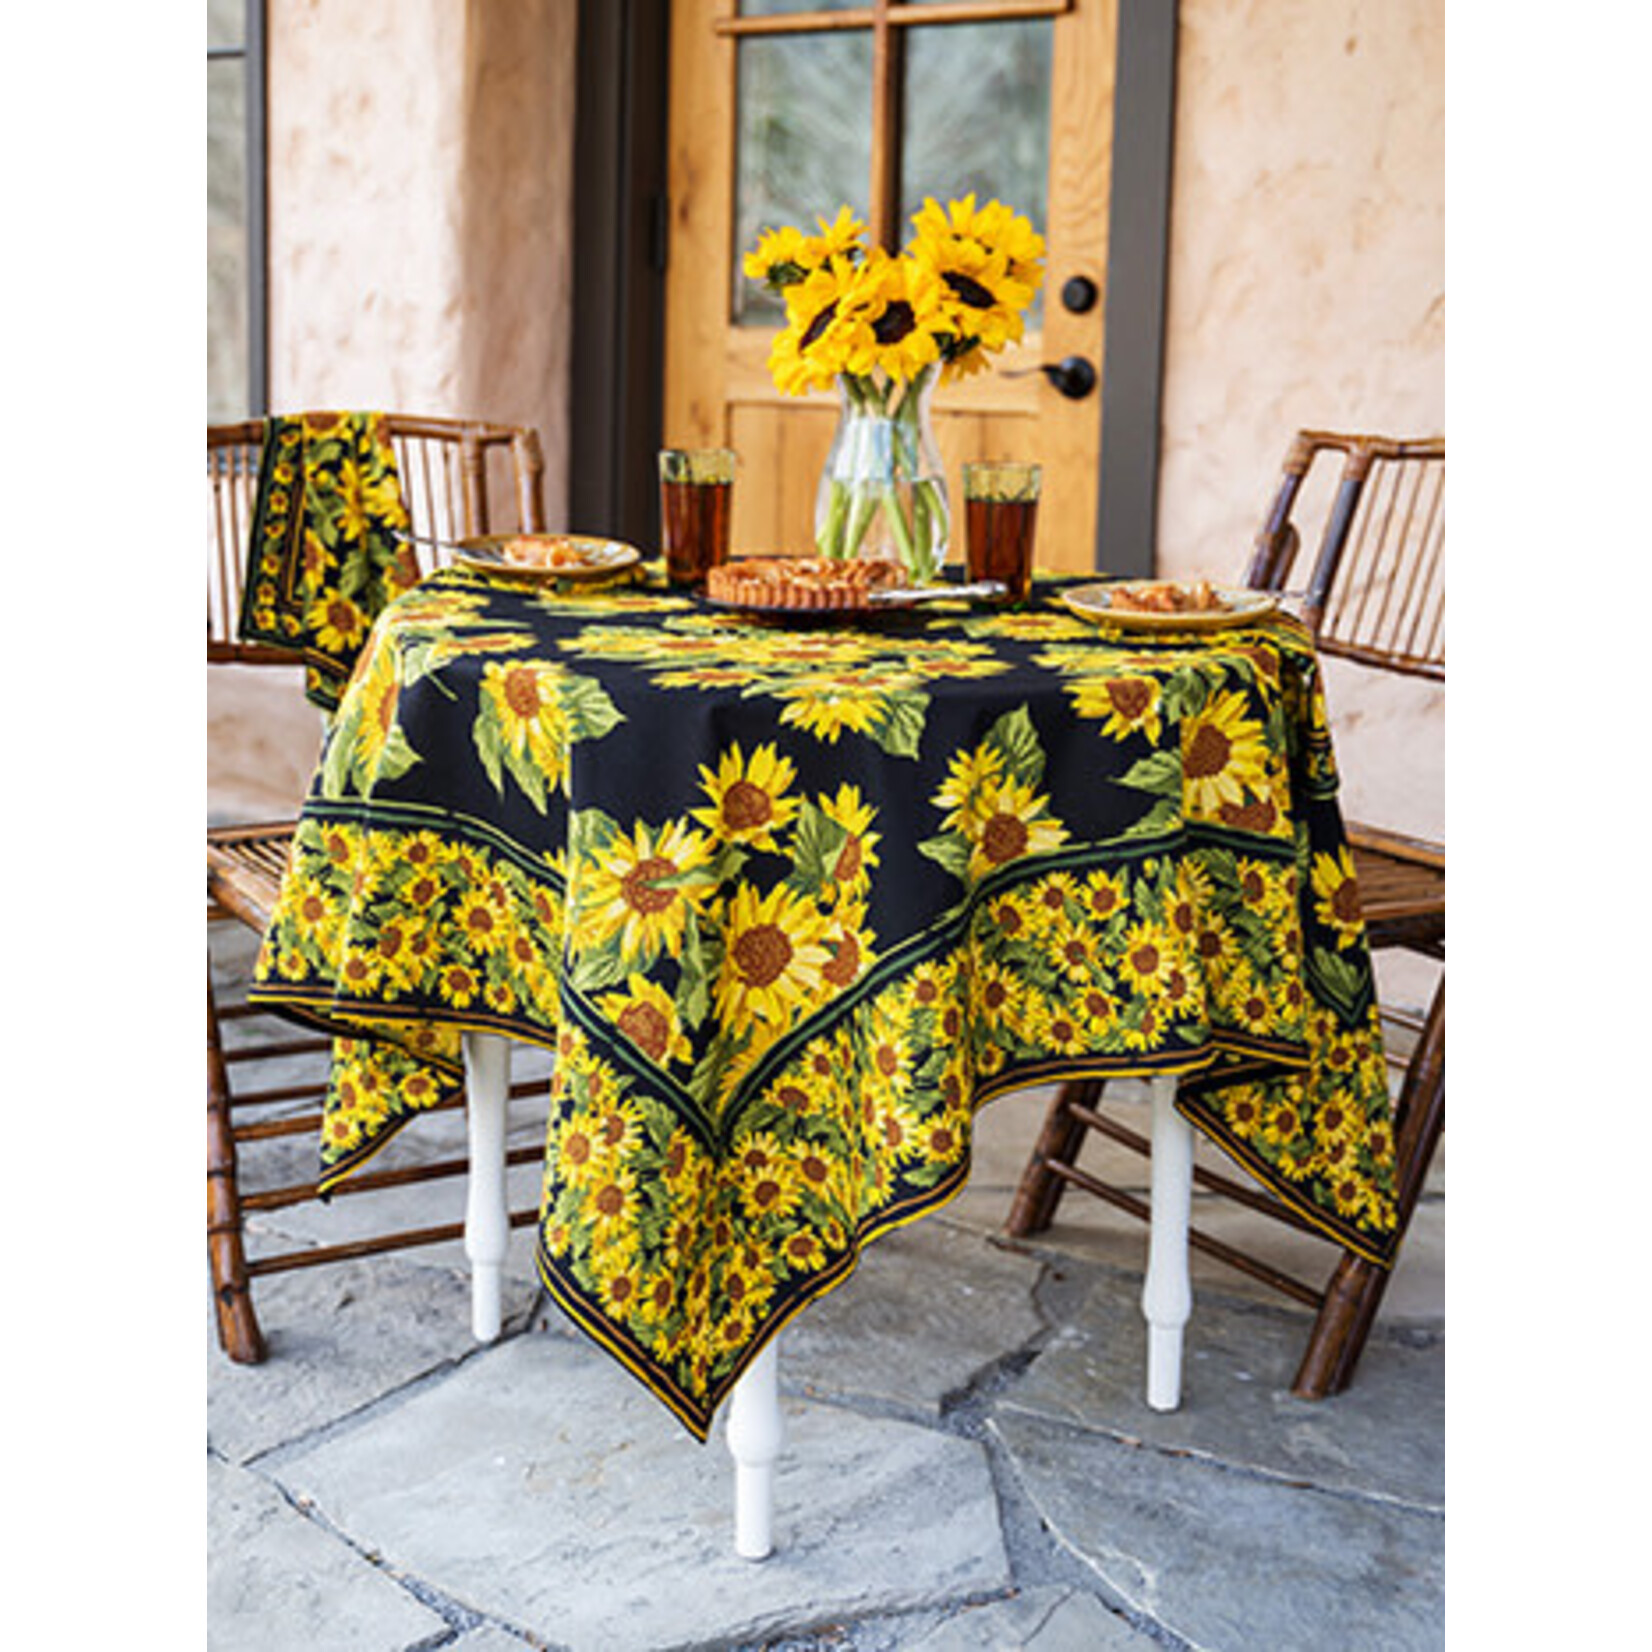 April Cornell Sunflower Valley Black Tablecloth  54x54